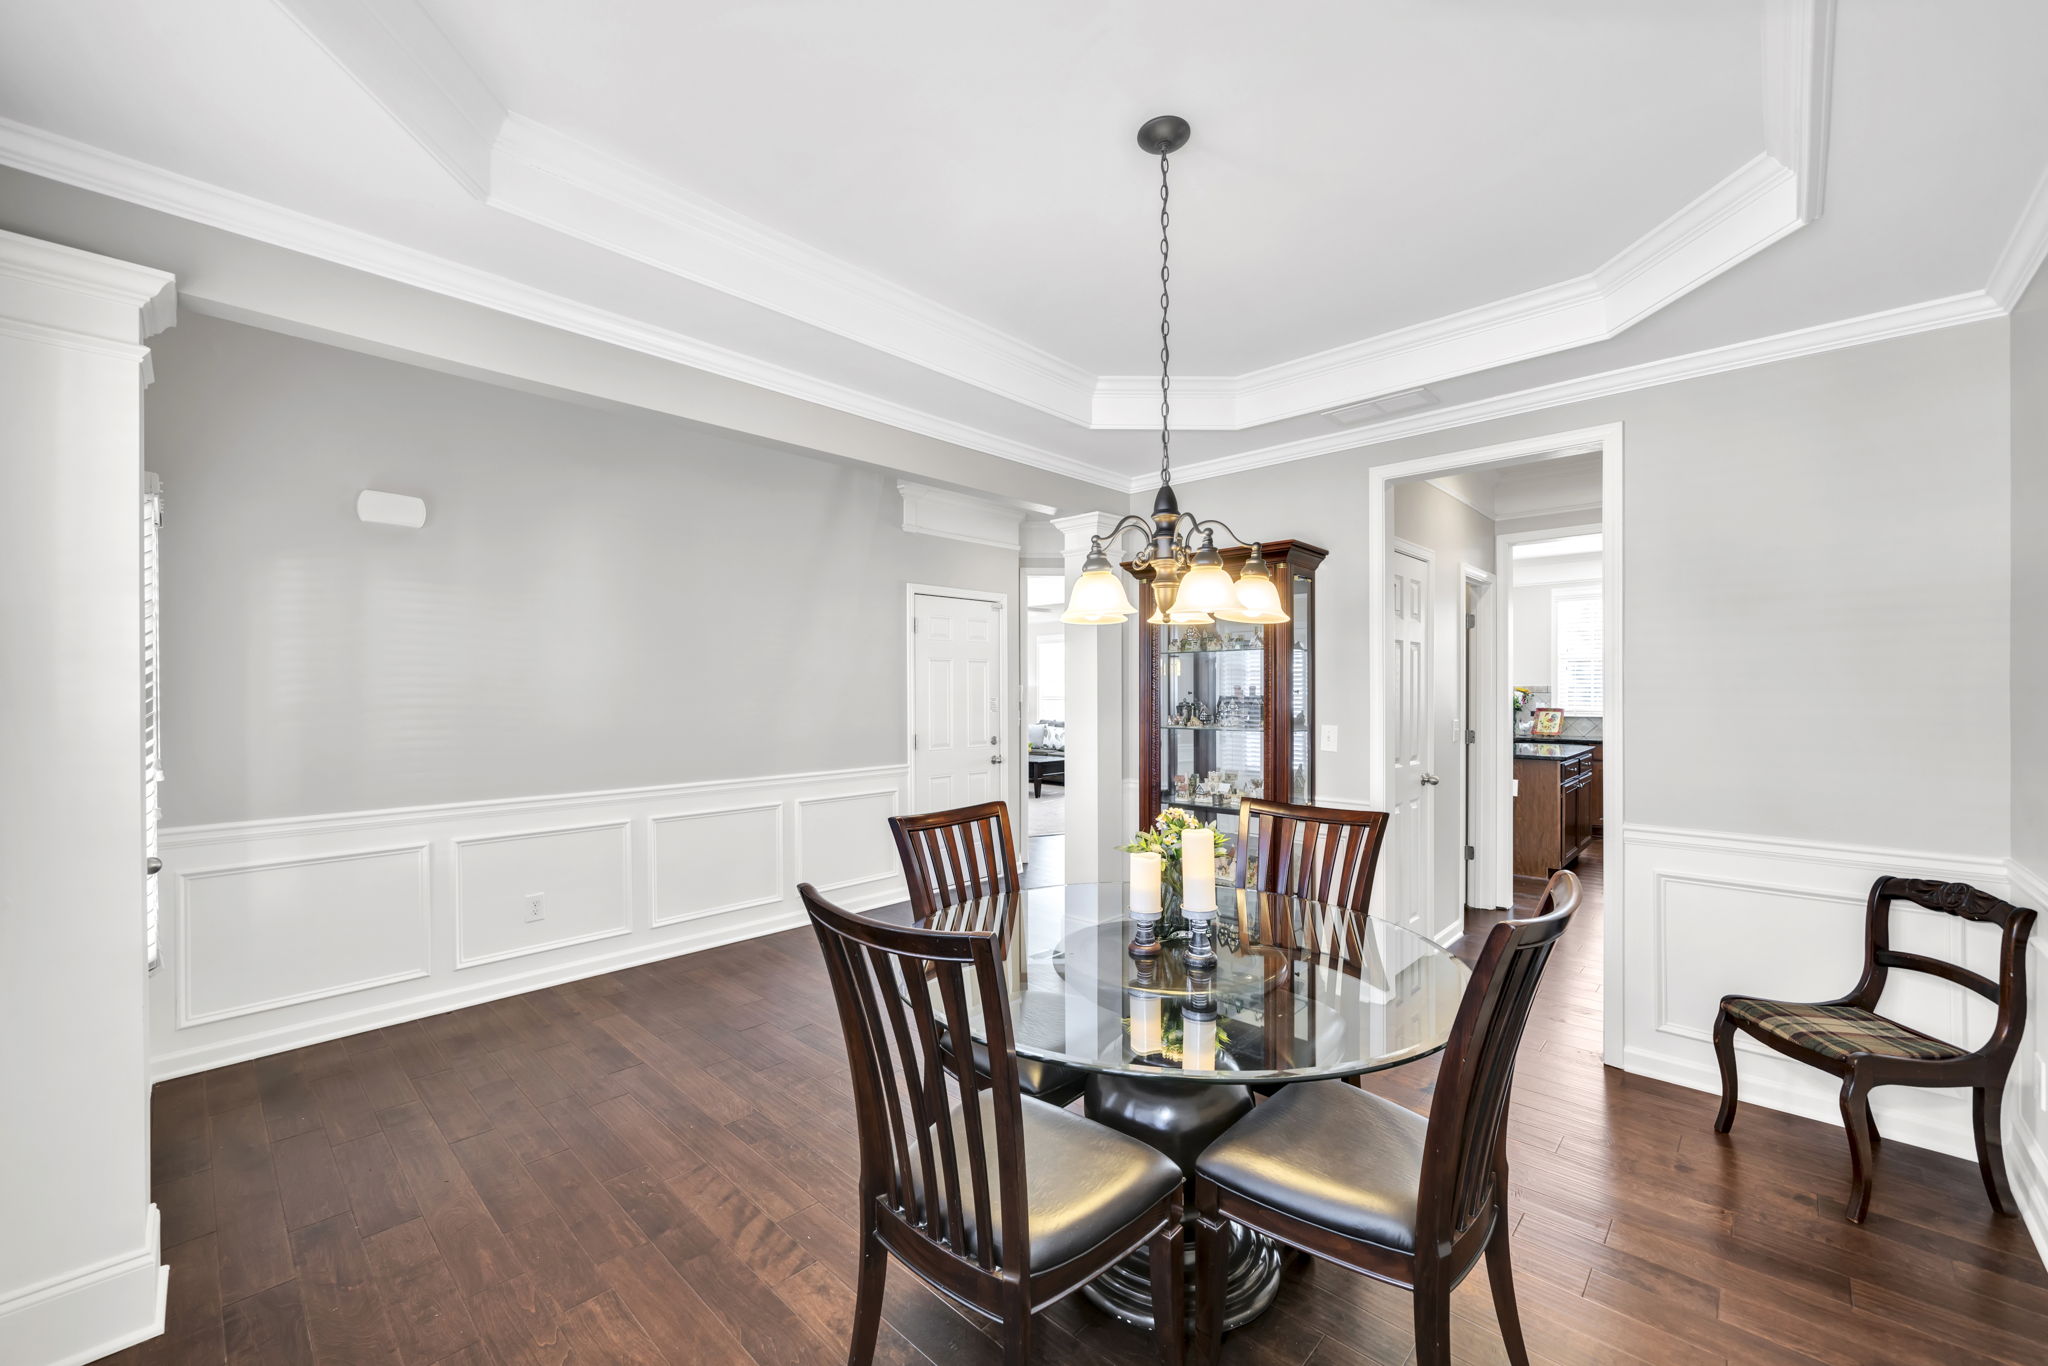 LARGE Dining Room Space